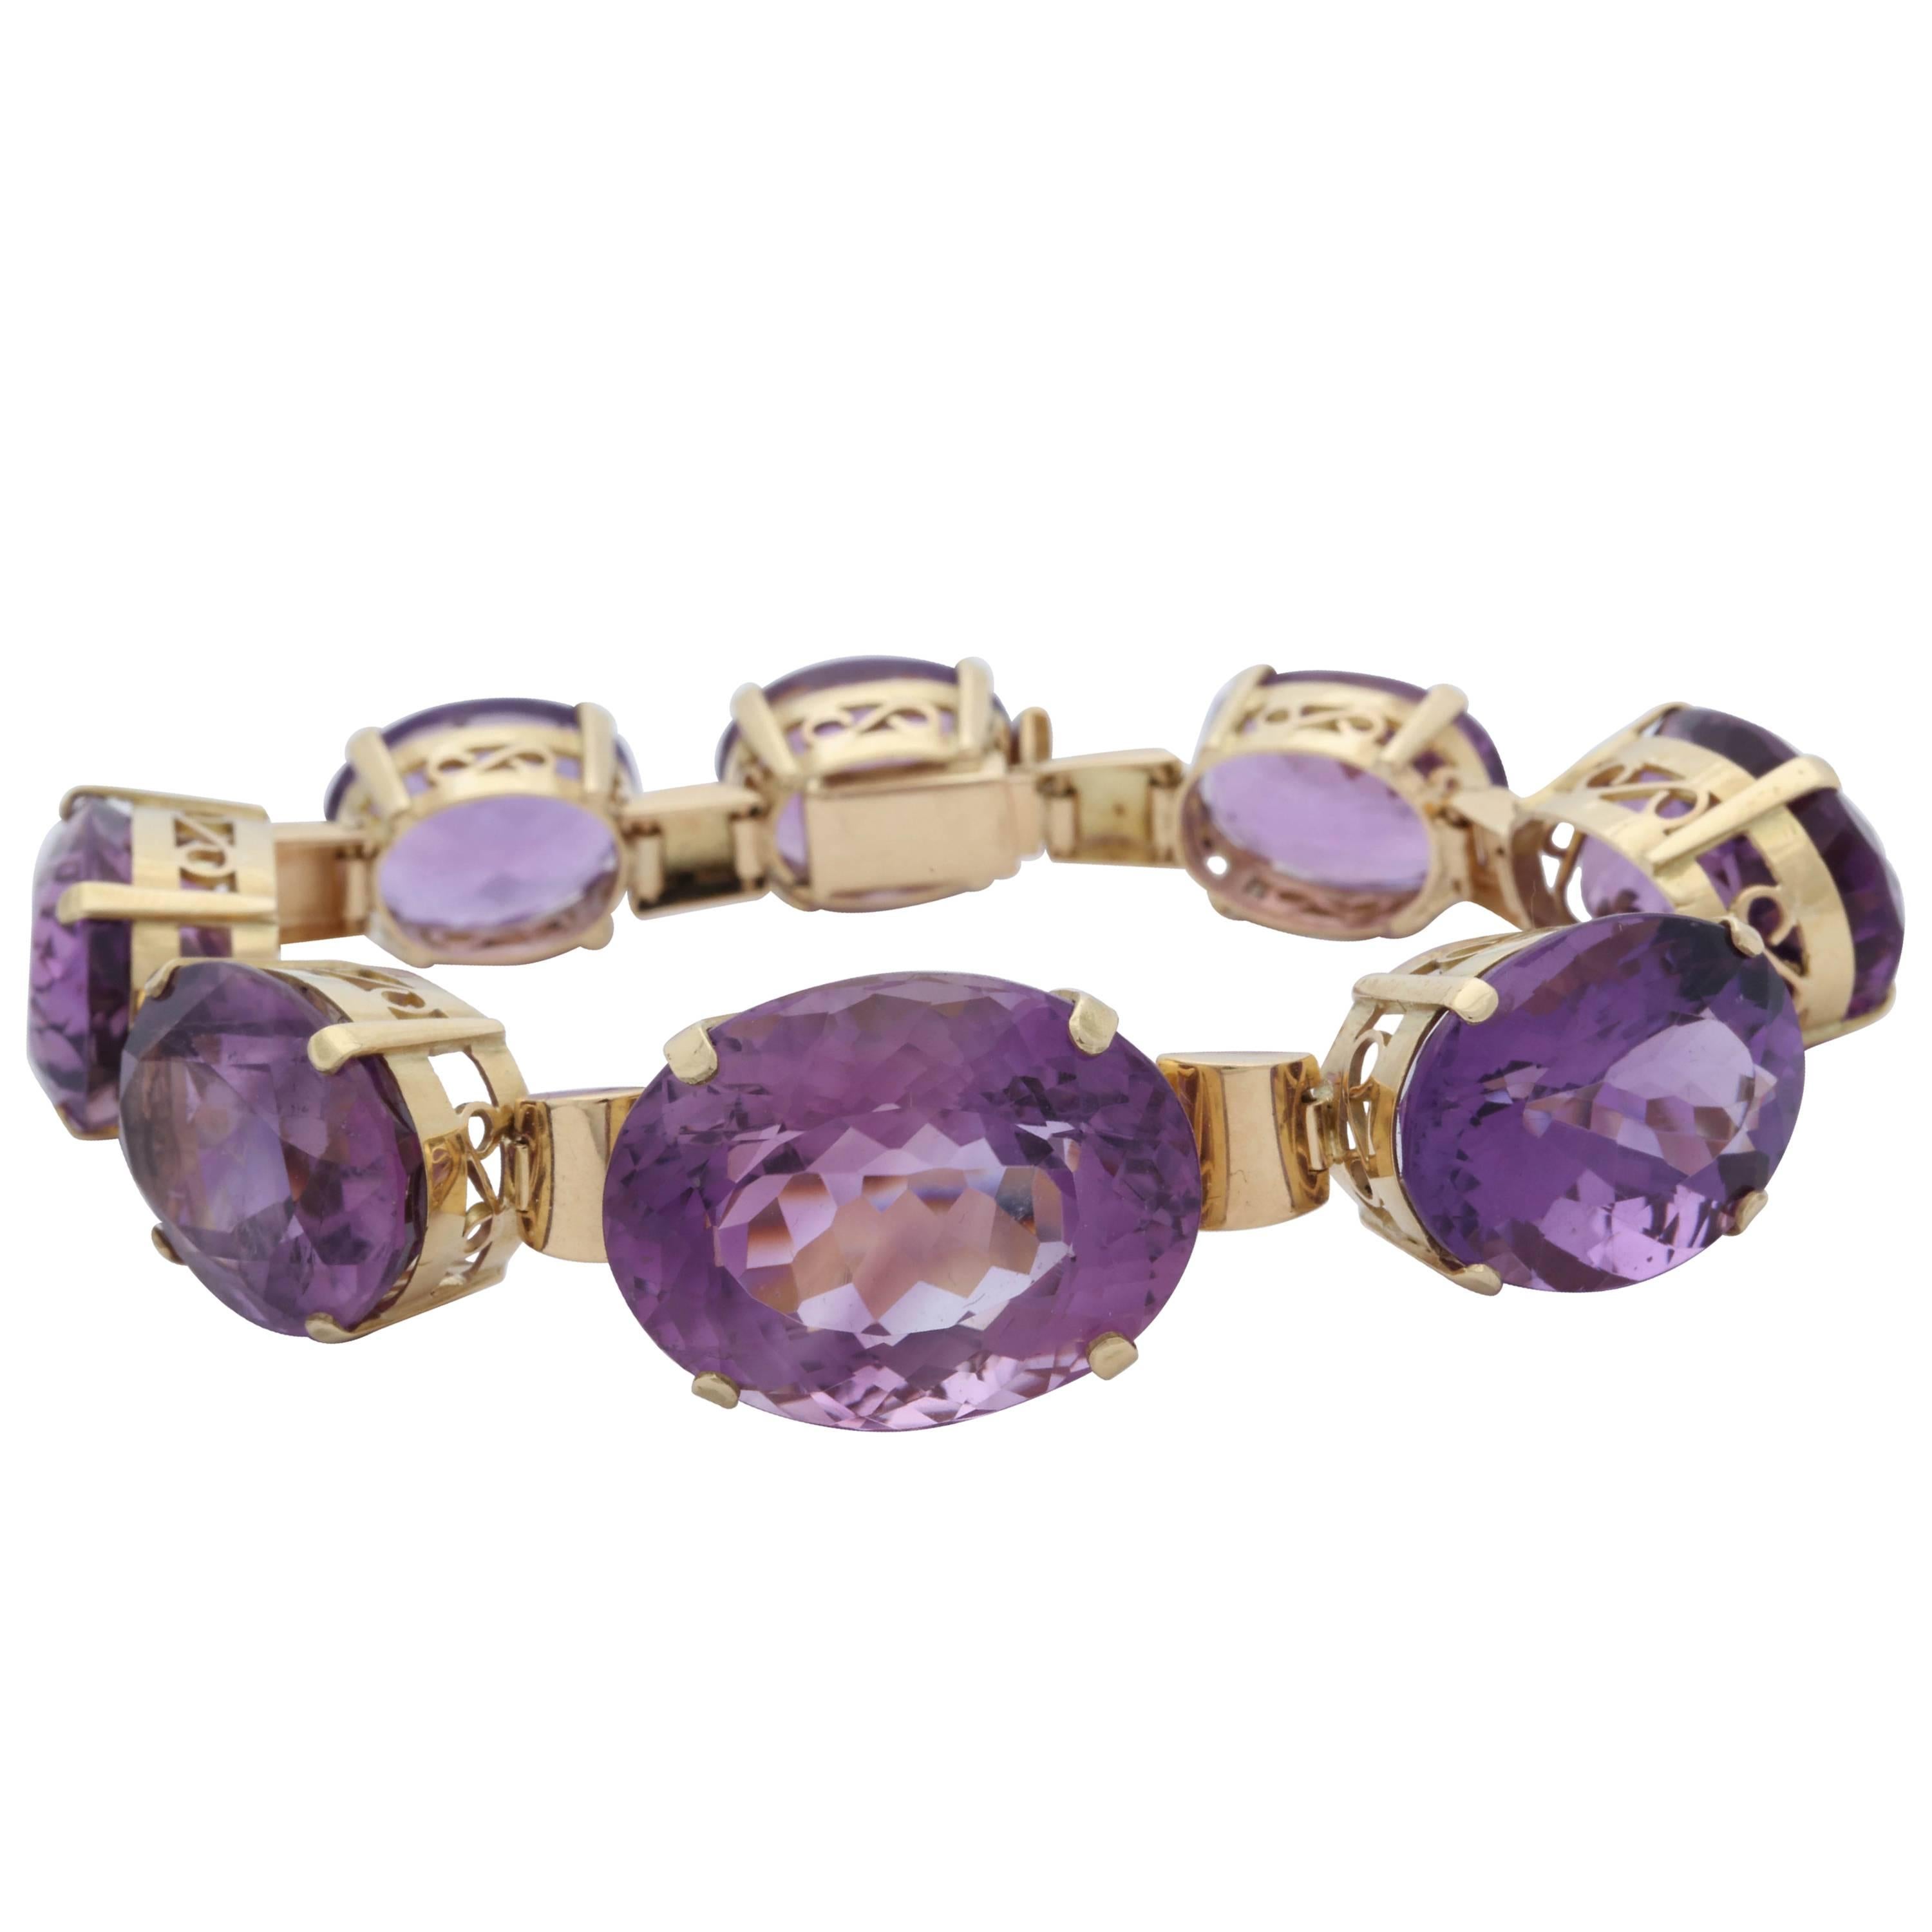 1950s Horizontal and Prong Set Oval Amethyst and Gold Link Bracelet